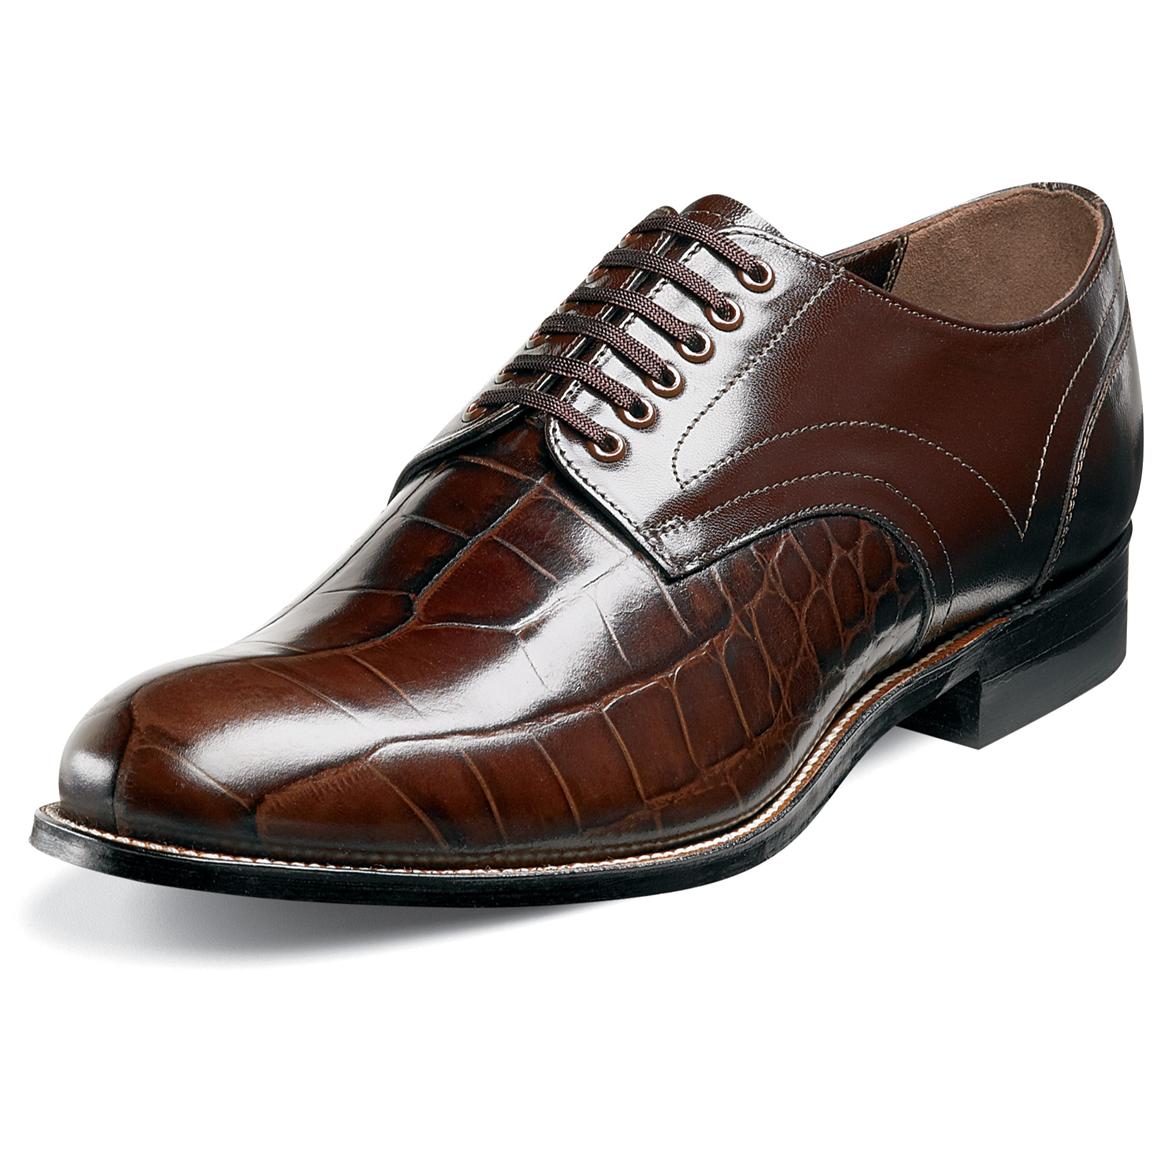 Men's Stacy Adams® Madison Dress Shoes - 207426, Dress Shoes at ...